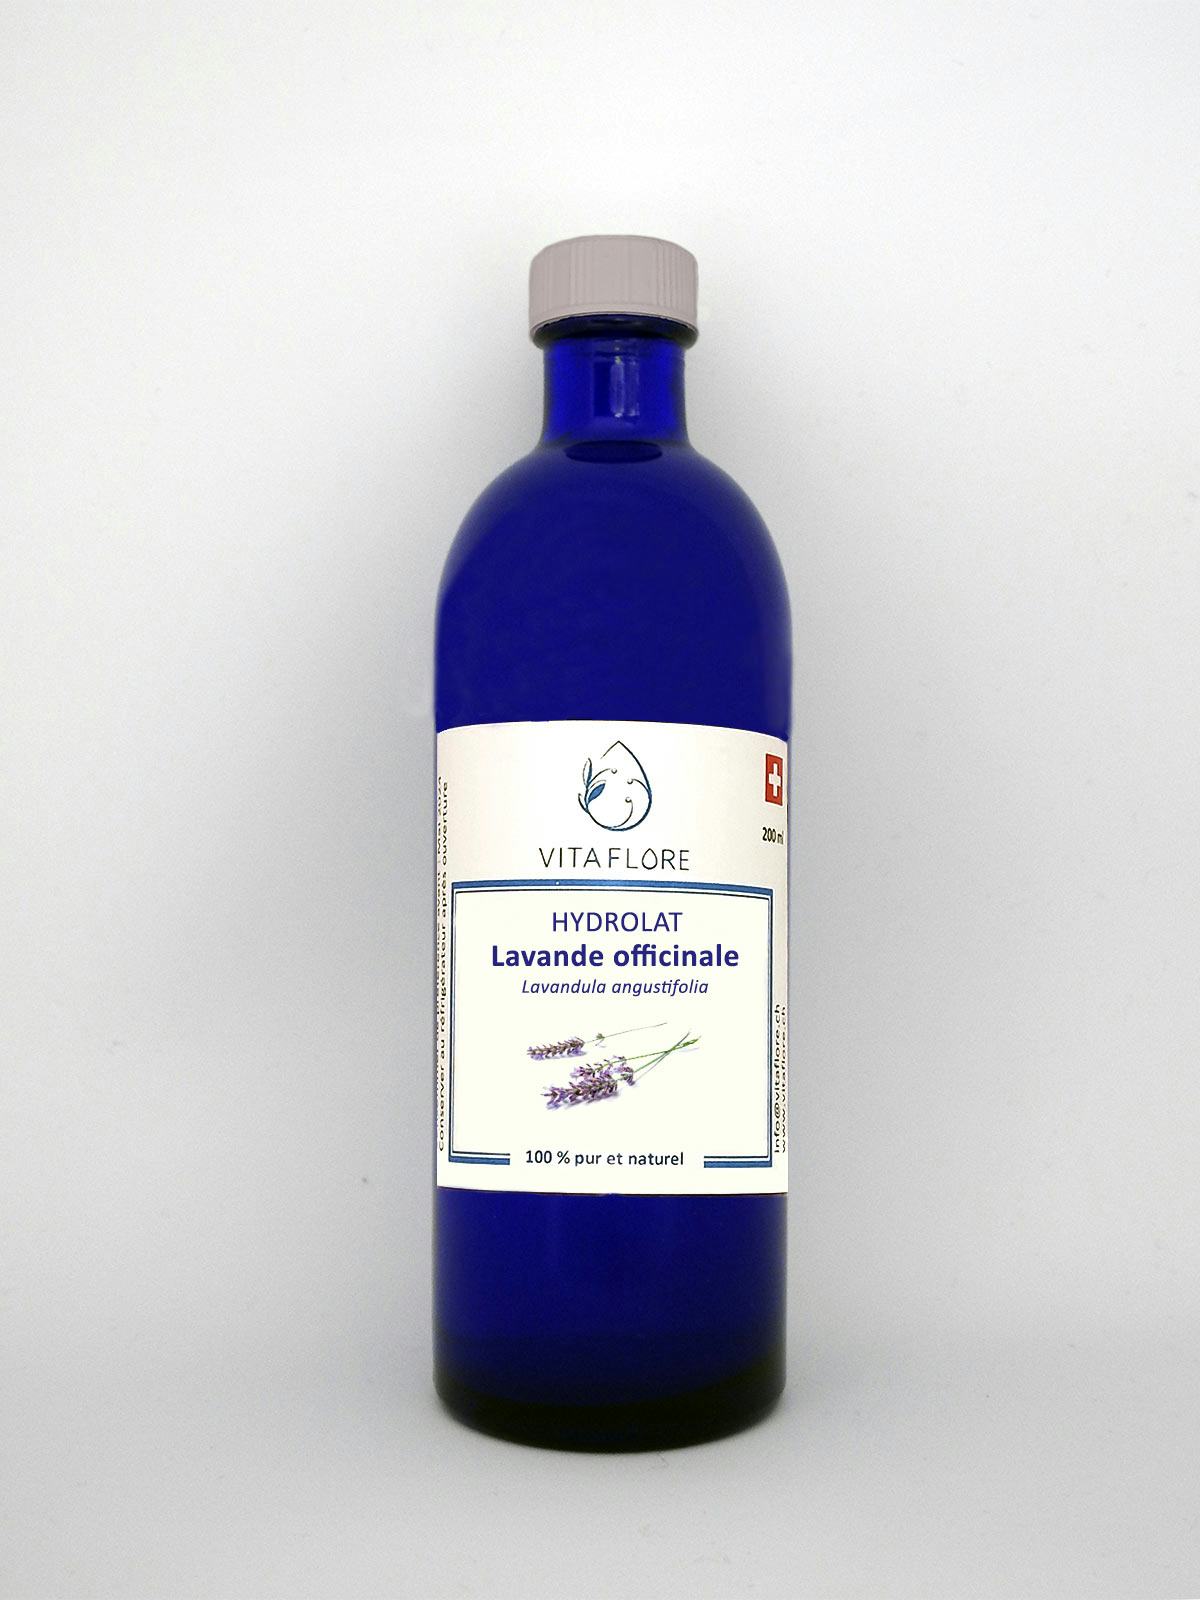 Hydrolat Lavande officinale, artisanal product for direct sale in Switzerland